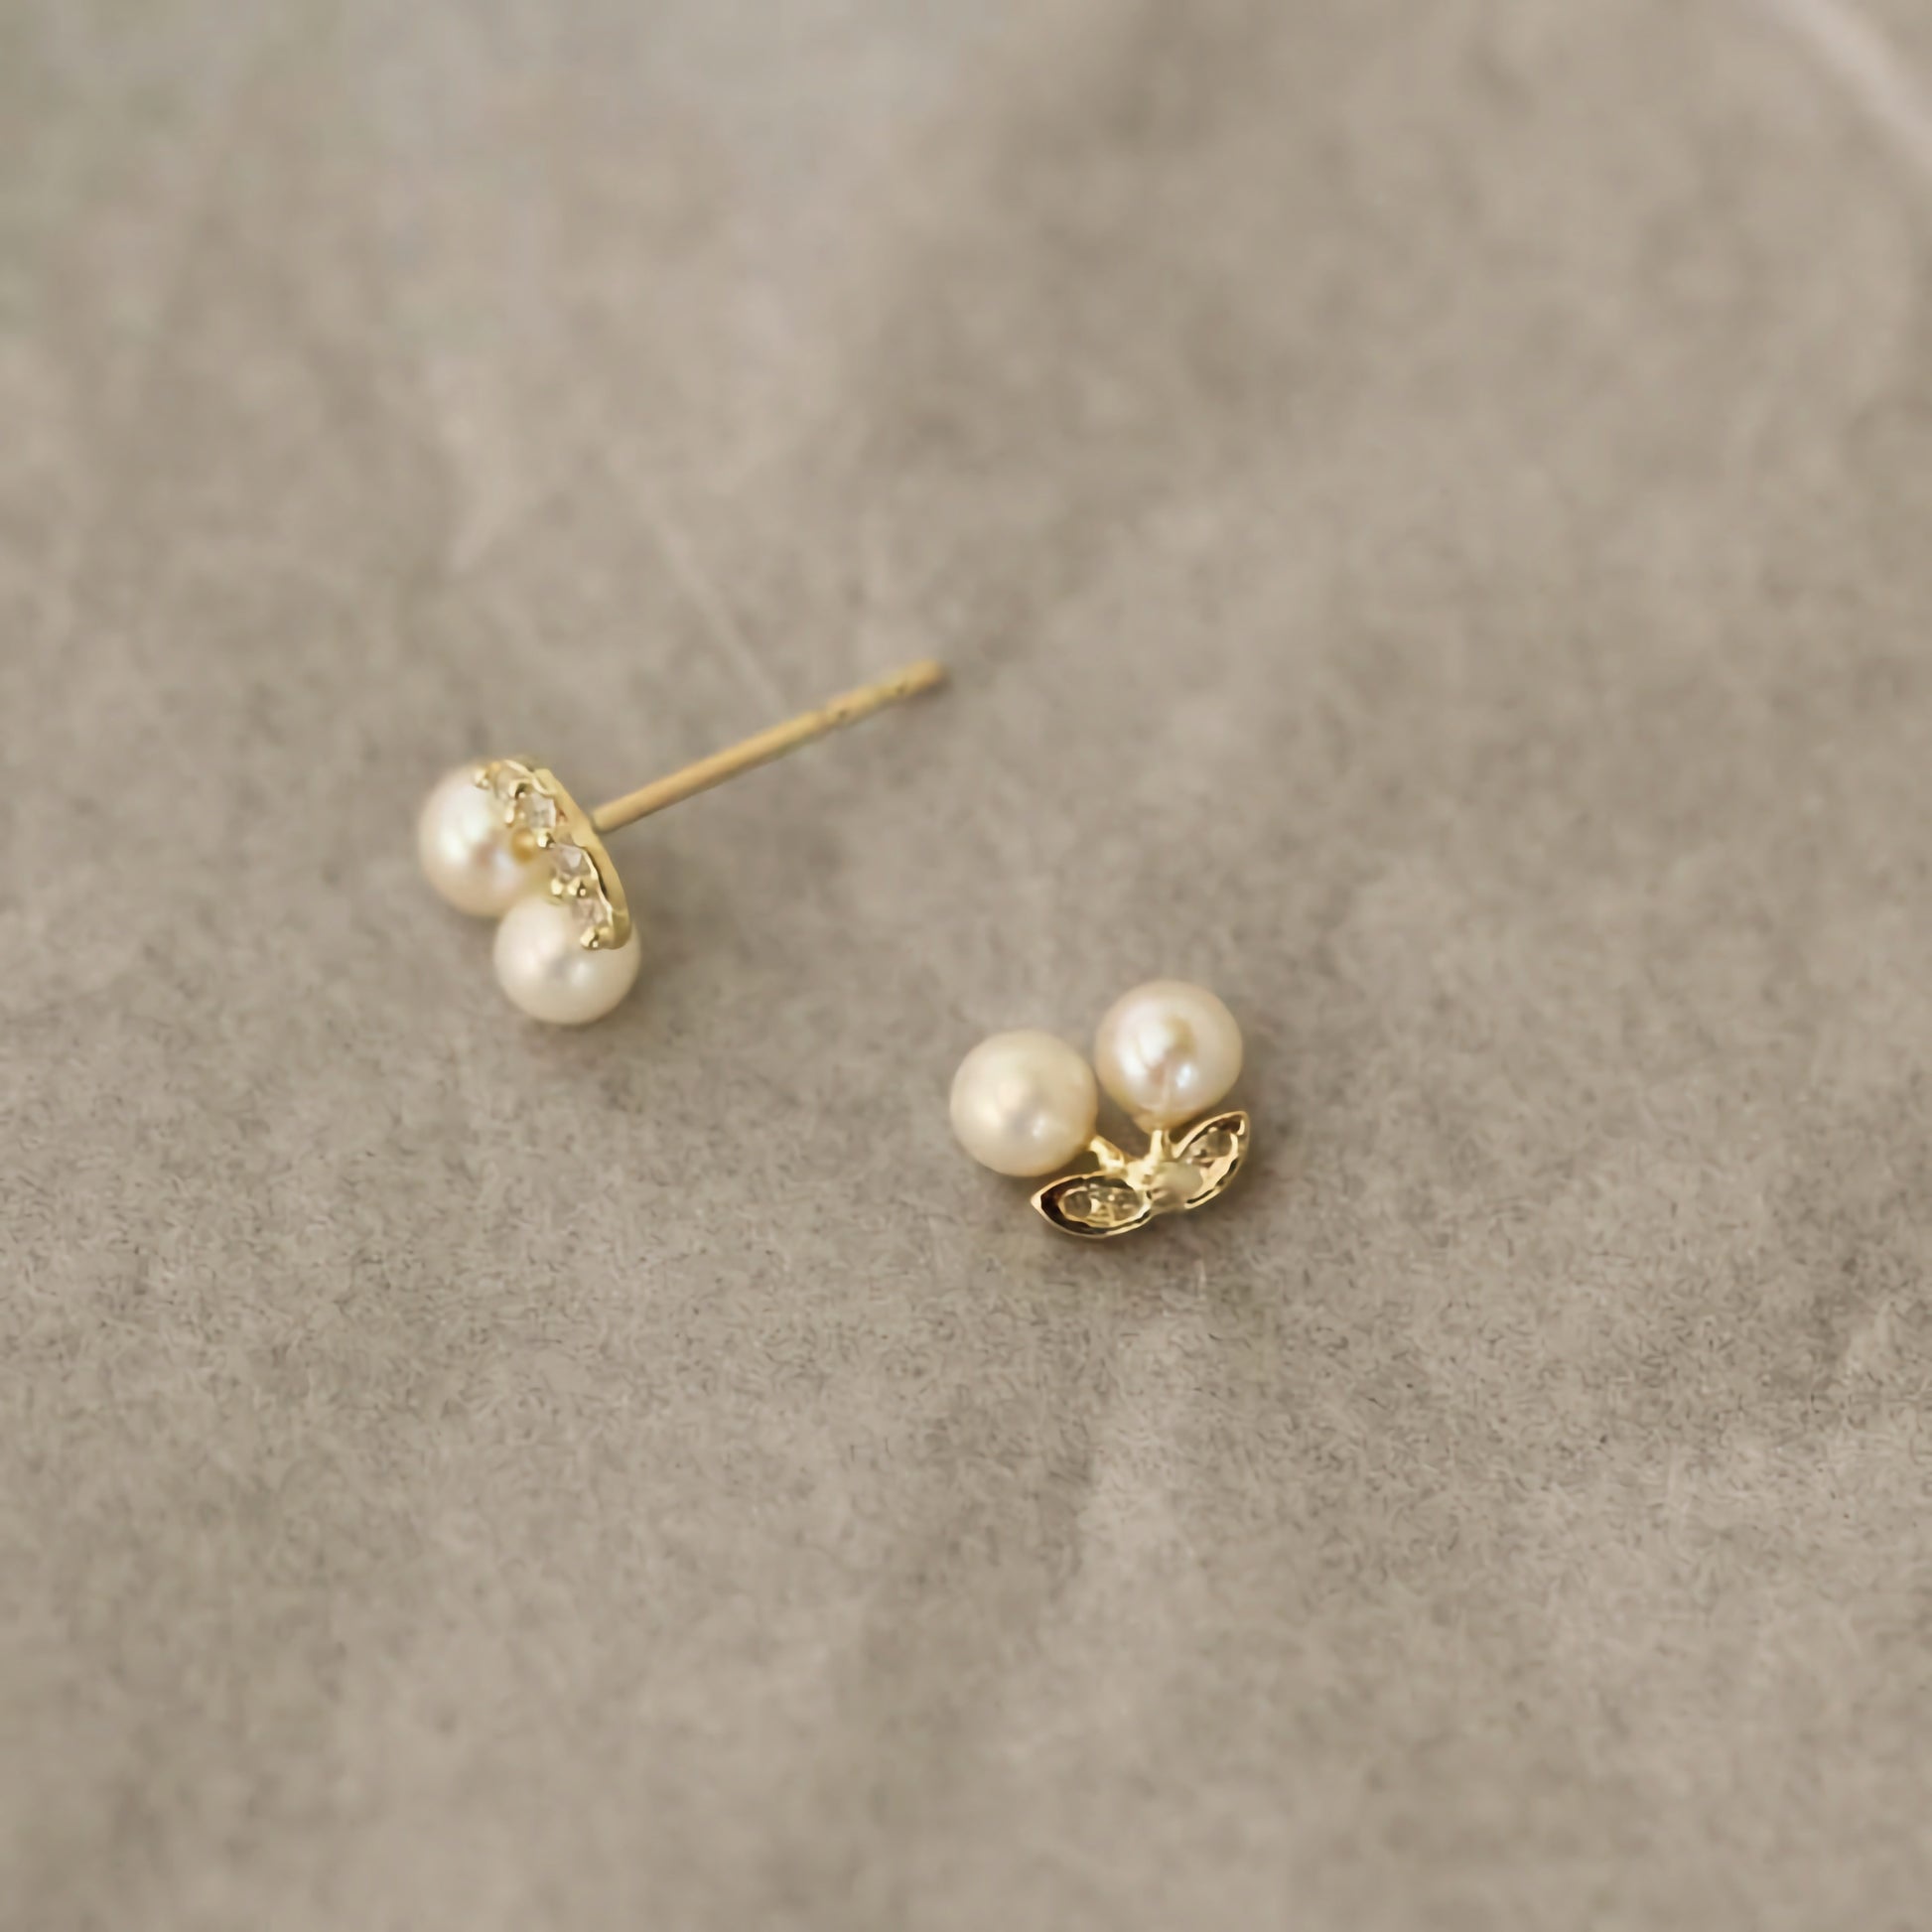 Close-up view of 9ct solid gold cherry-shaped earrings, featuring glossy pearls as the fruit.